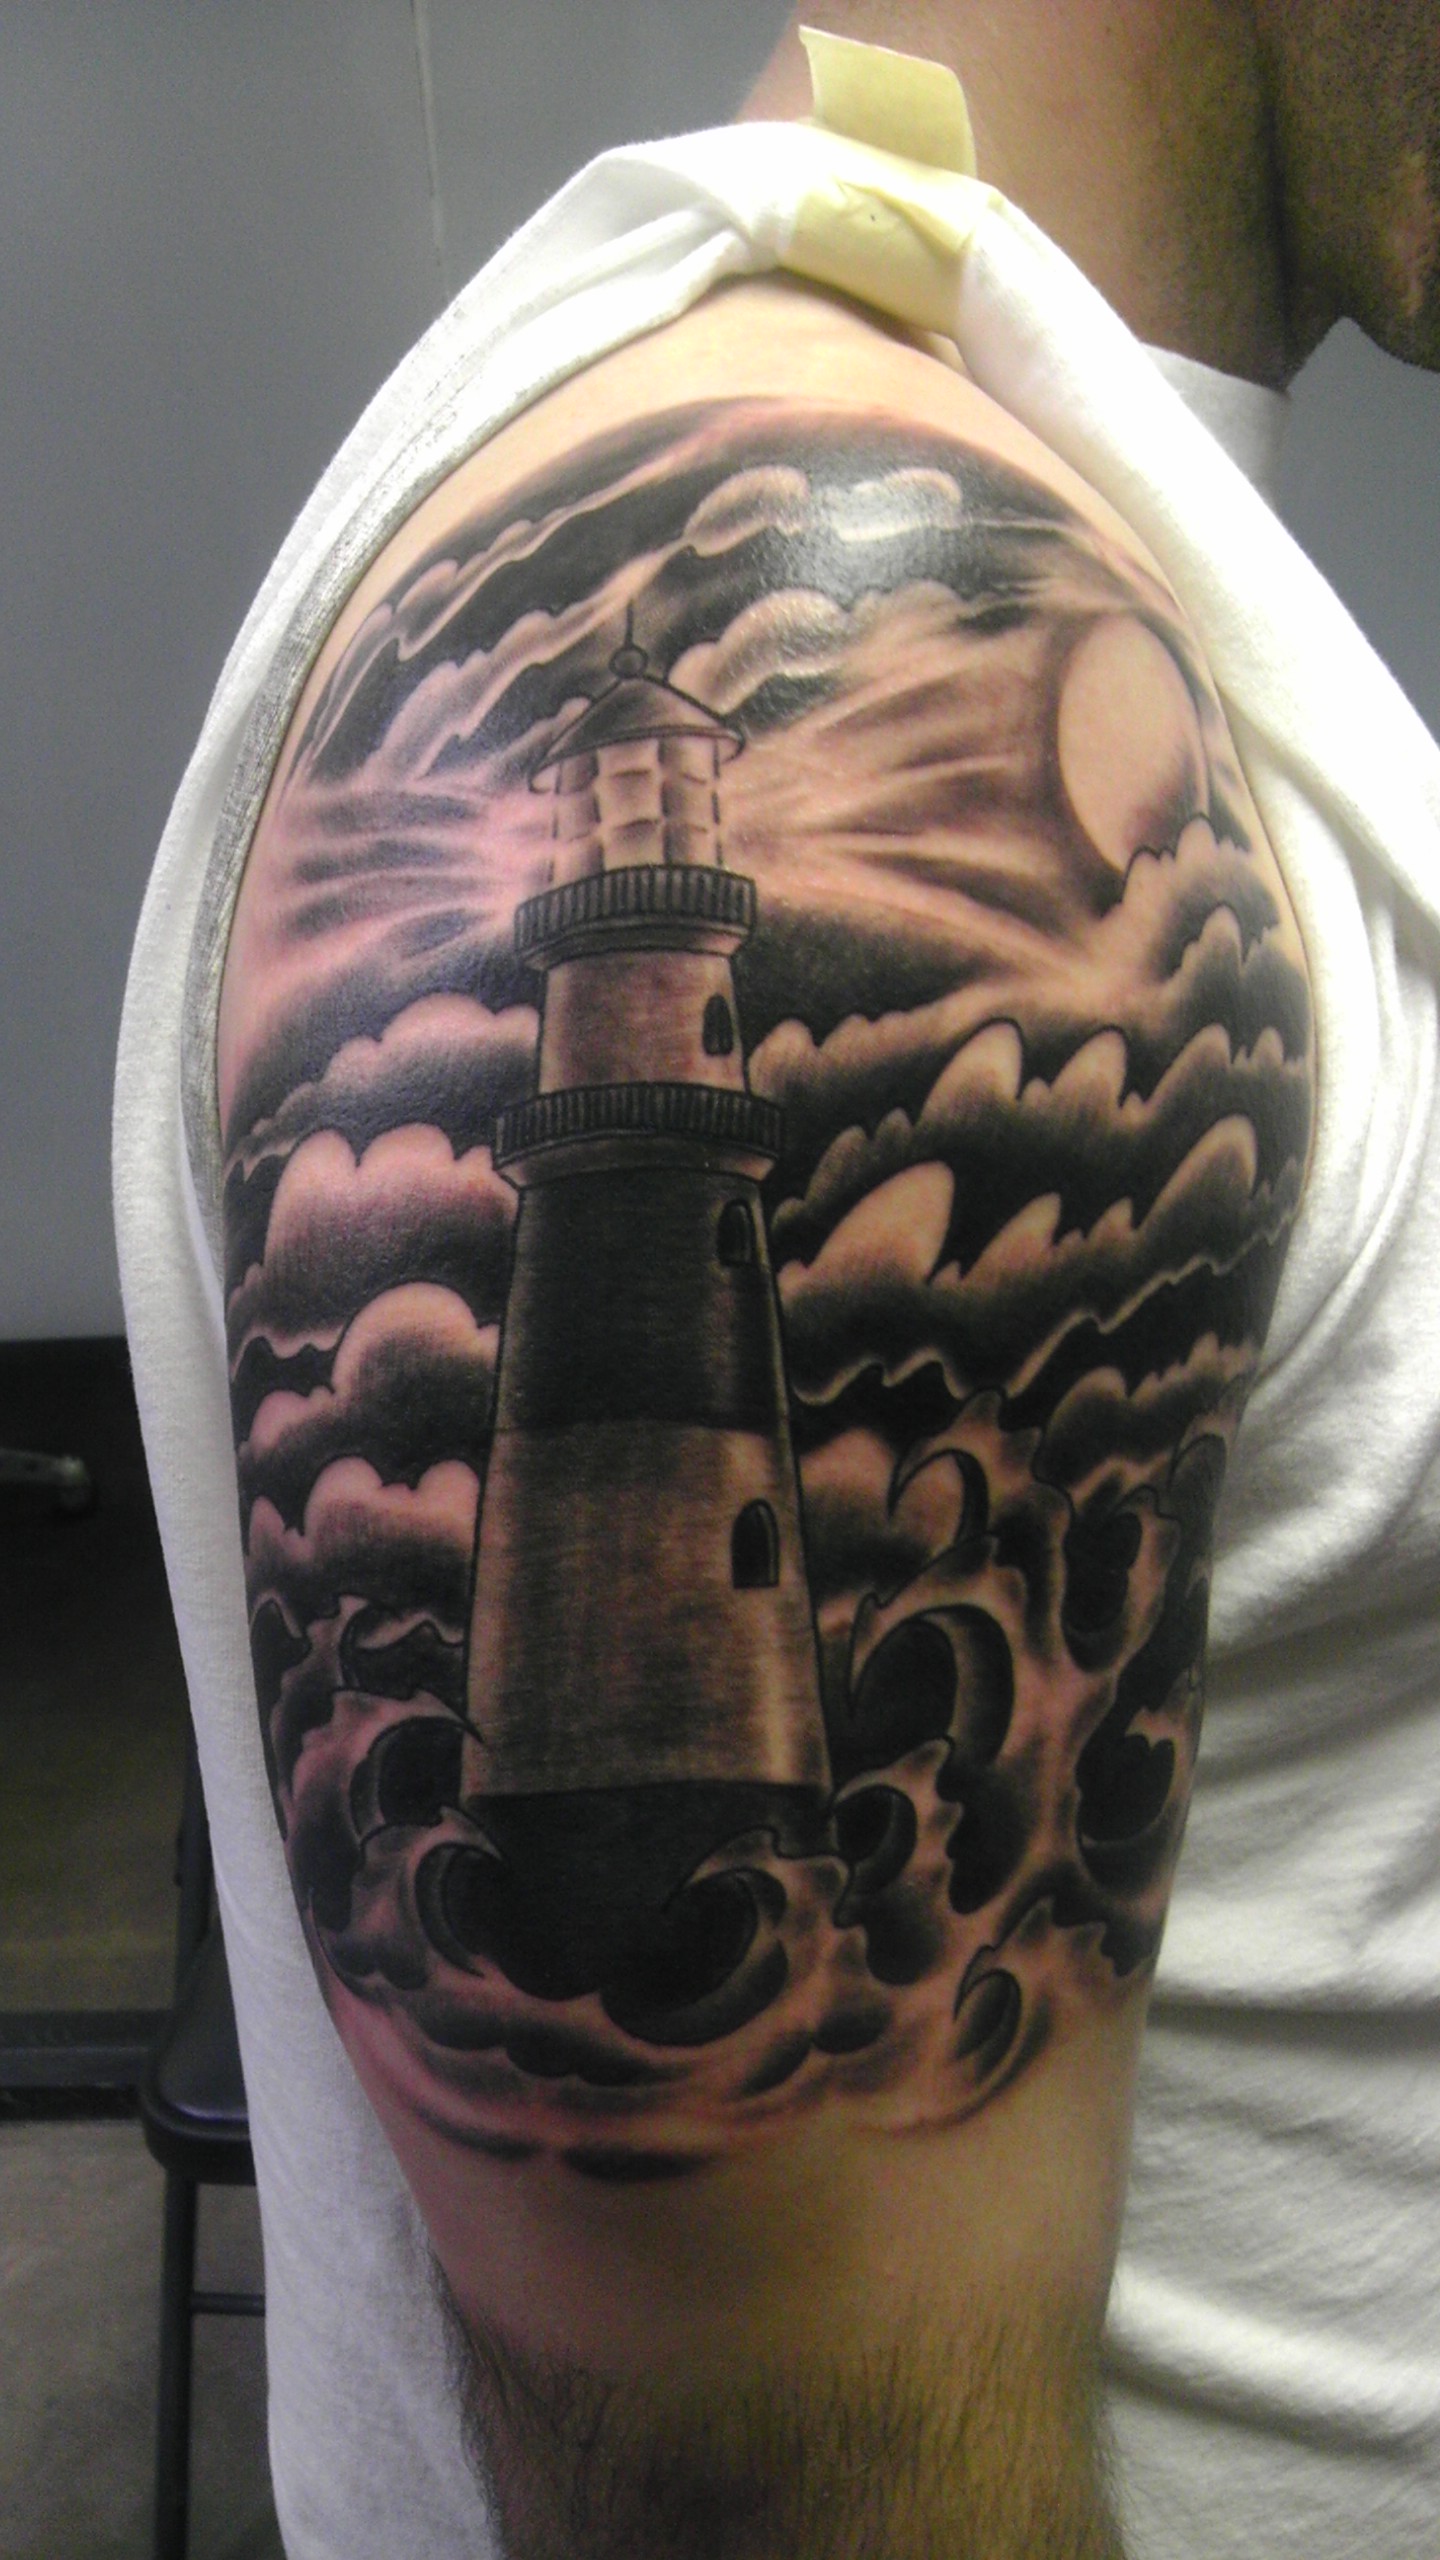 Lighthouse Tattoos Designs, Ideas and Meaning | Tattoos ...